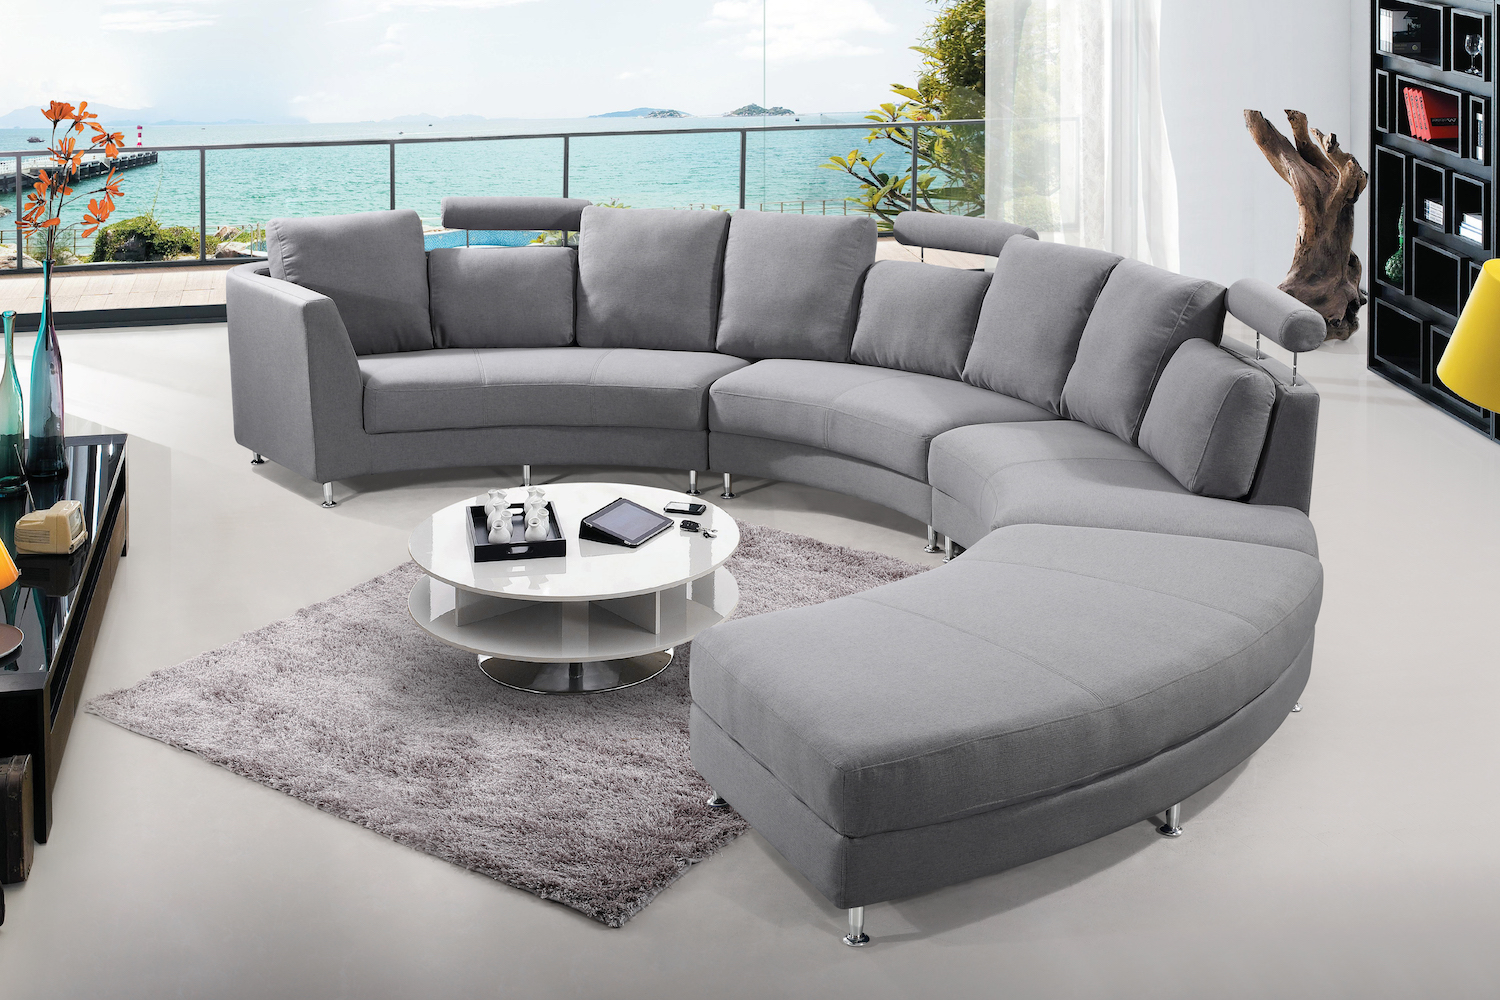 blue leather modern industrial curve round sofa